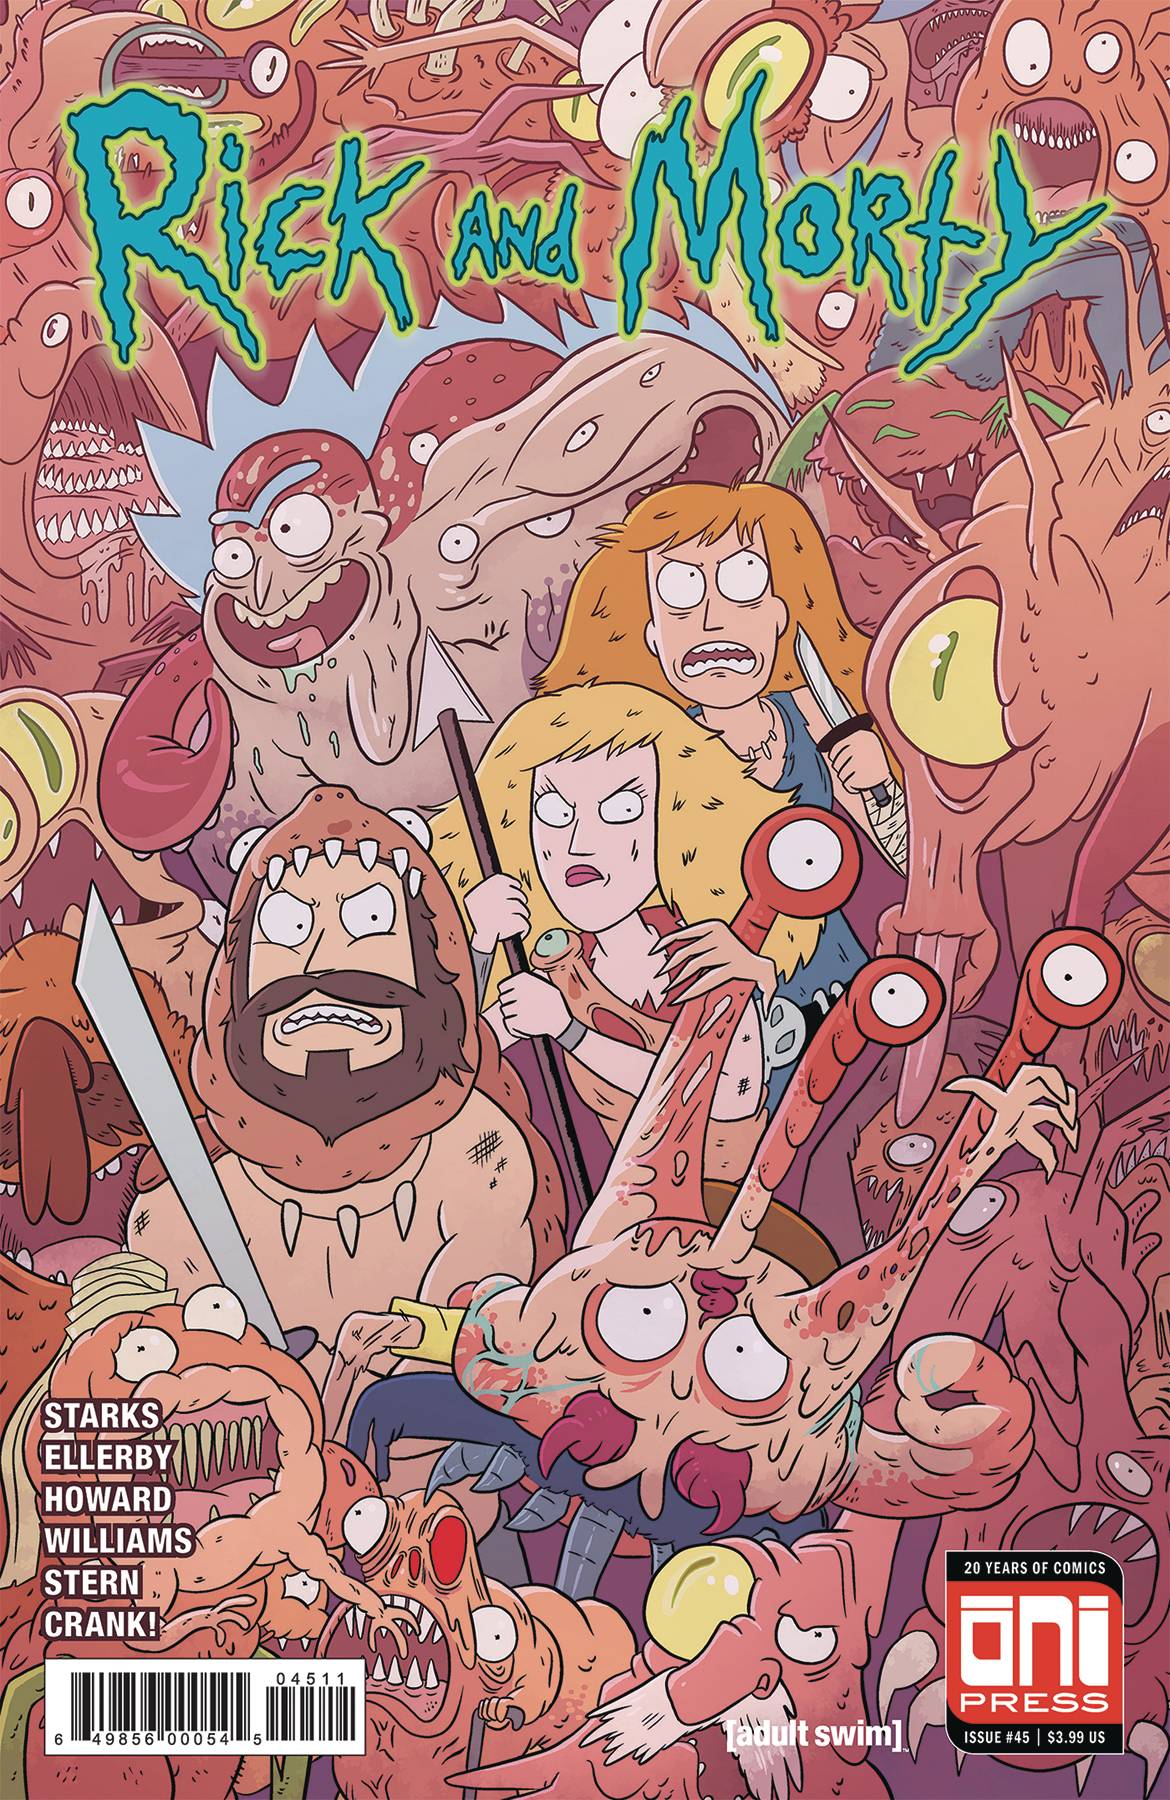 Rick and Morty #45 Cover A (2015)